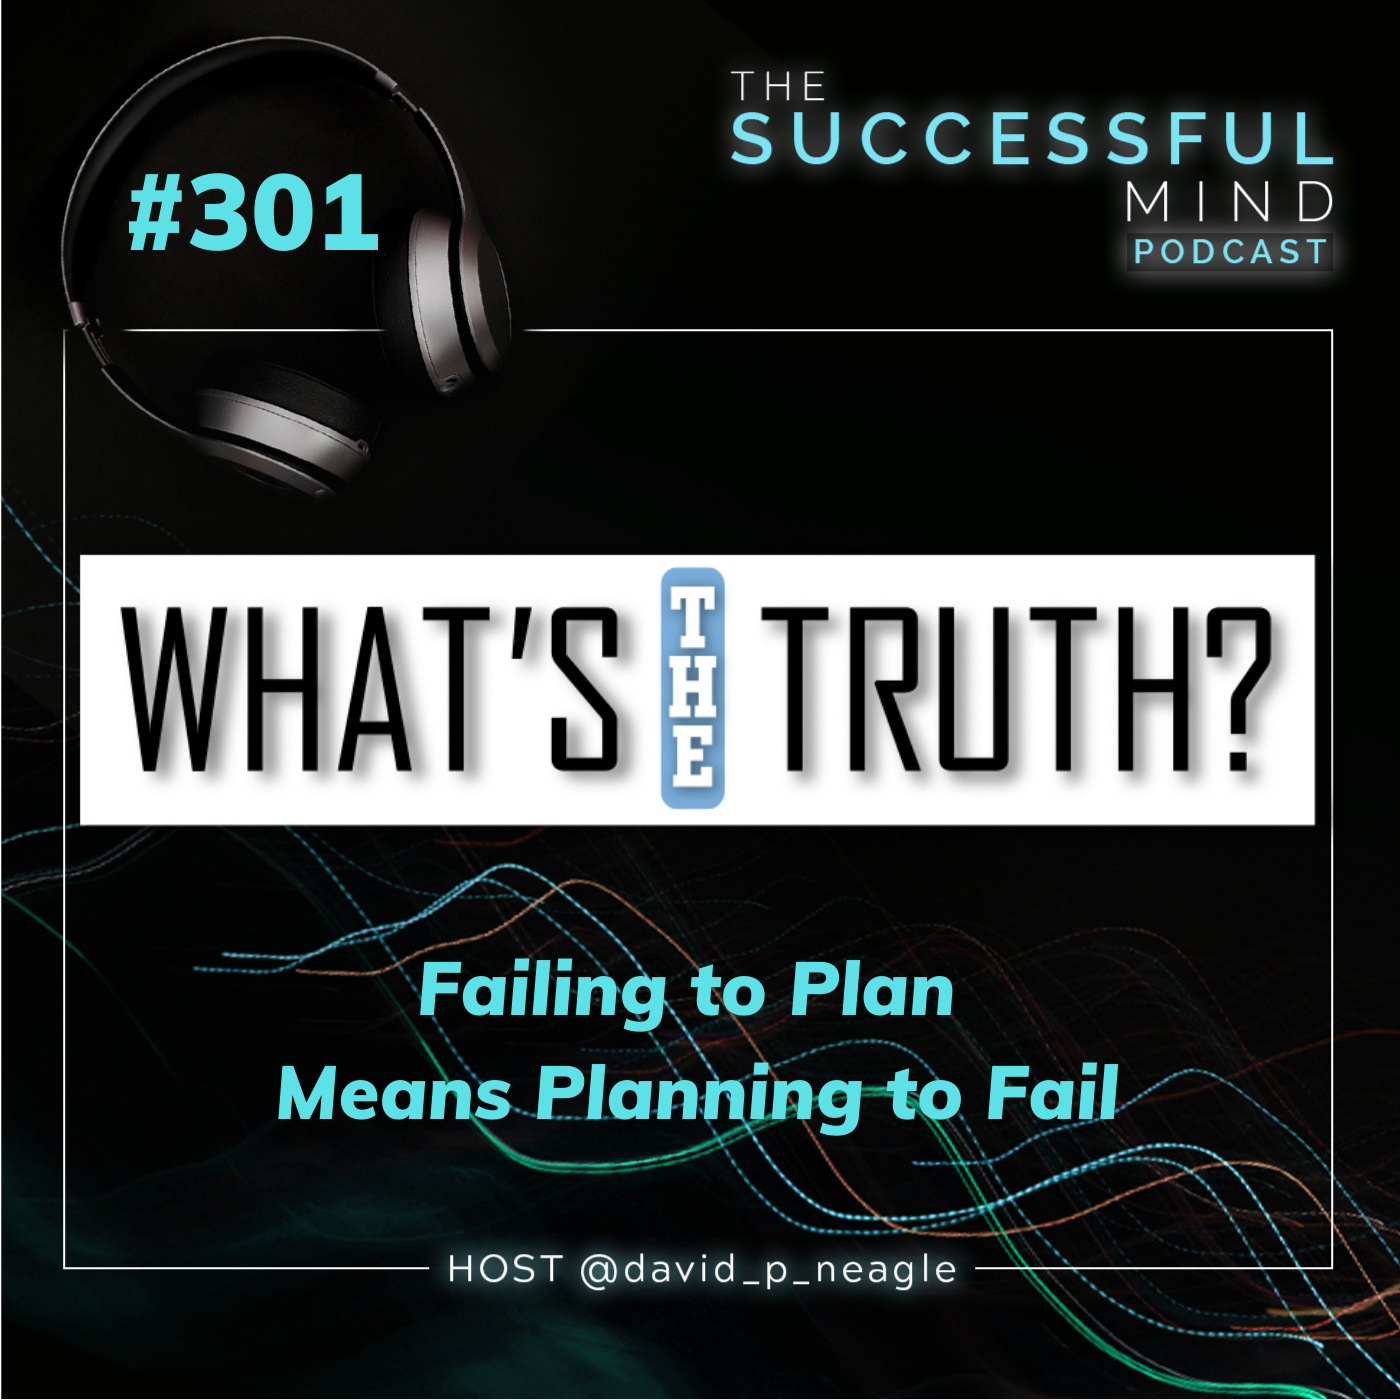 The Successful Mind Podcast- Episode 301- What's the Truth- Failing to Plan Means Planning to Fail